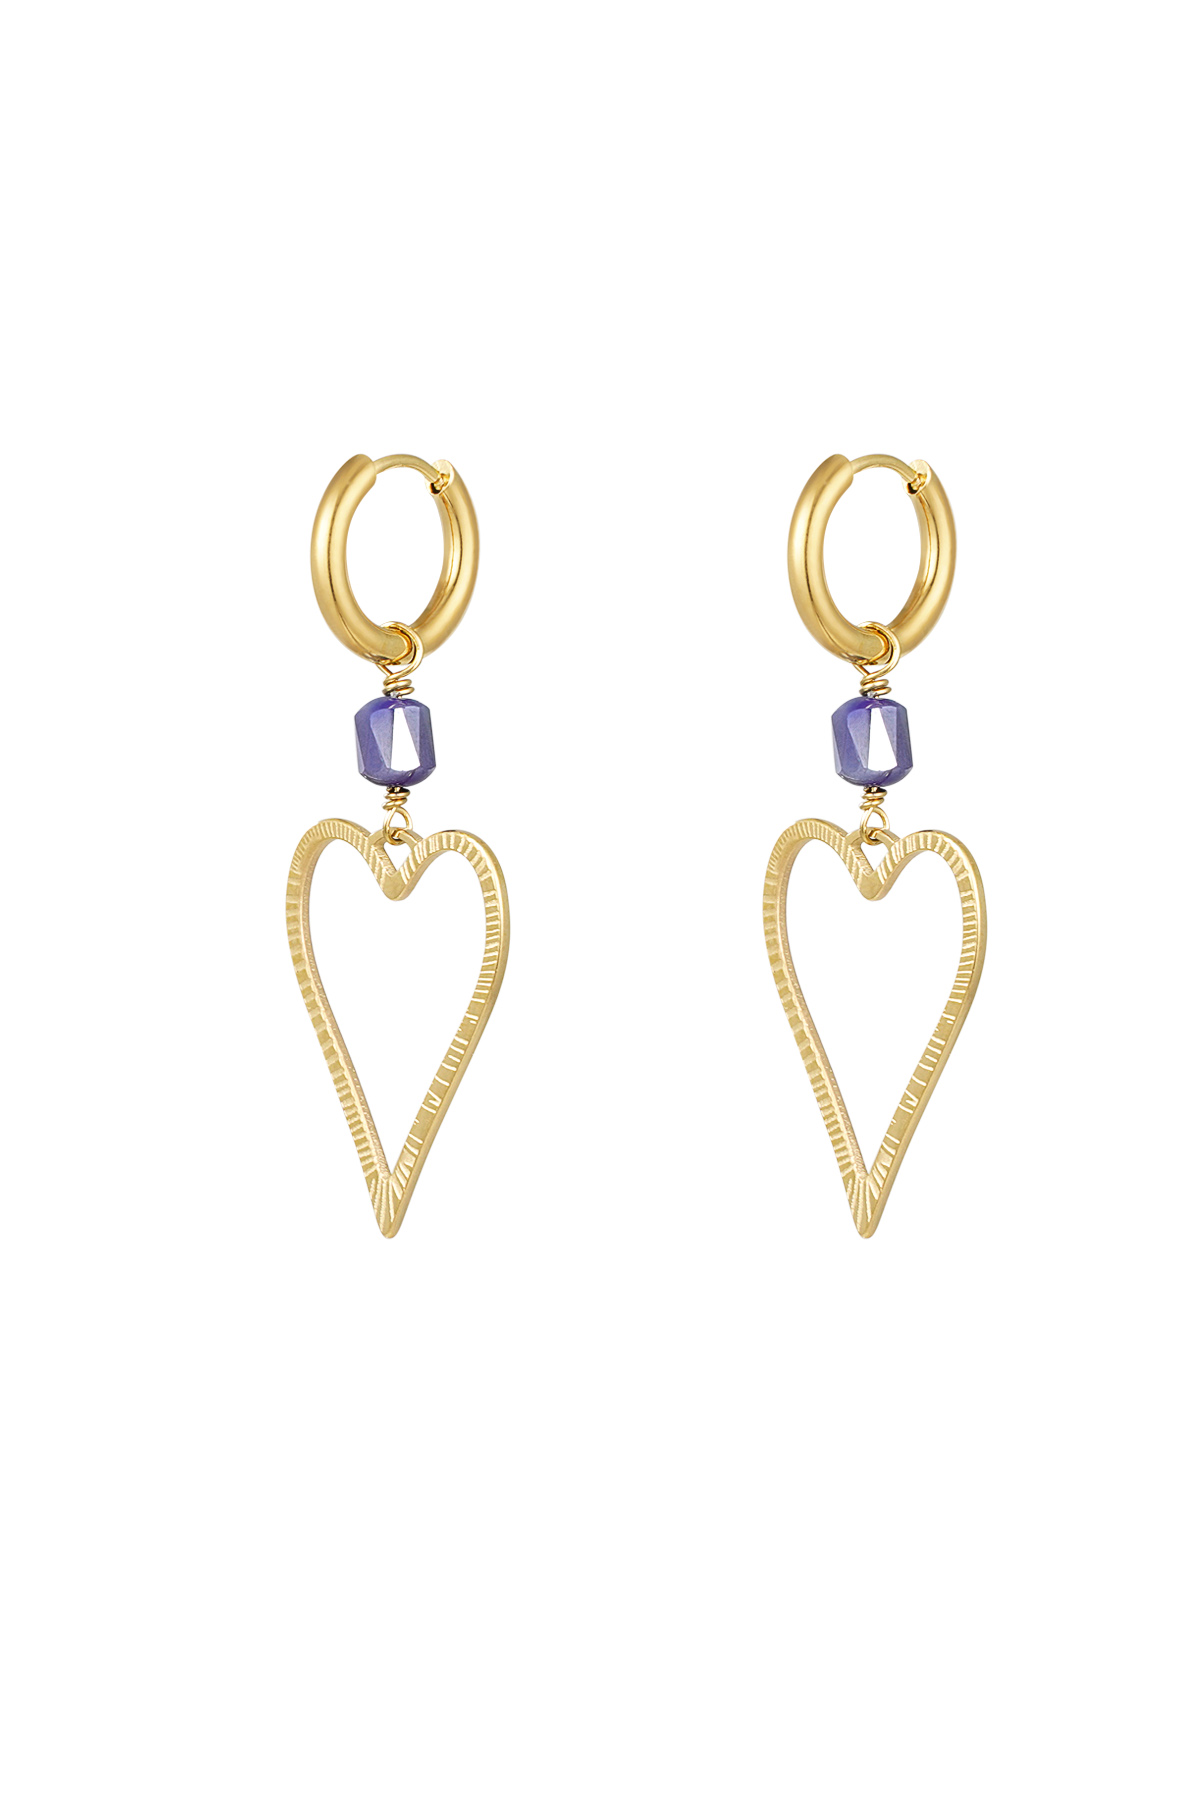 Earrings heart with stone - gold/lilac h5 